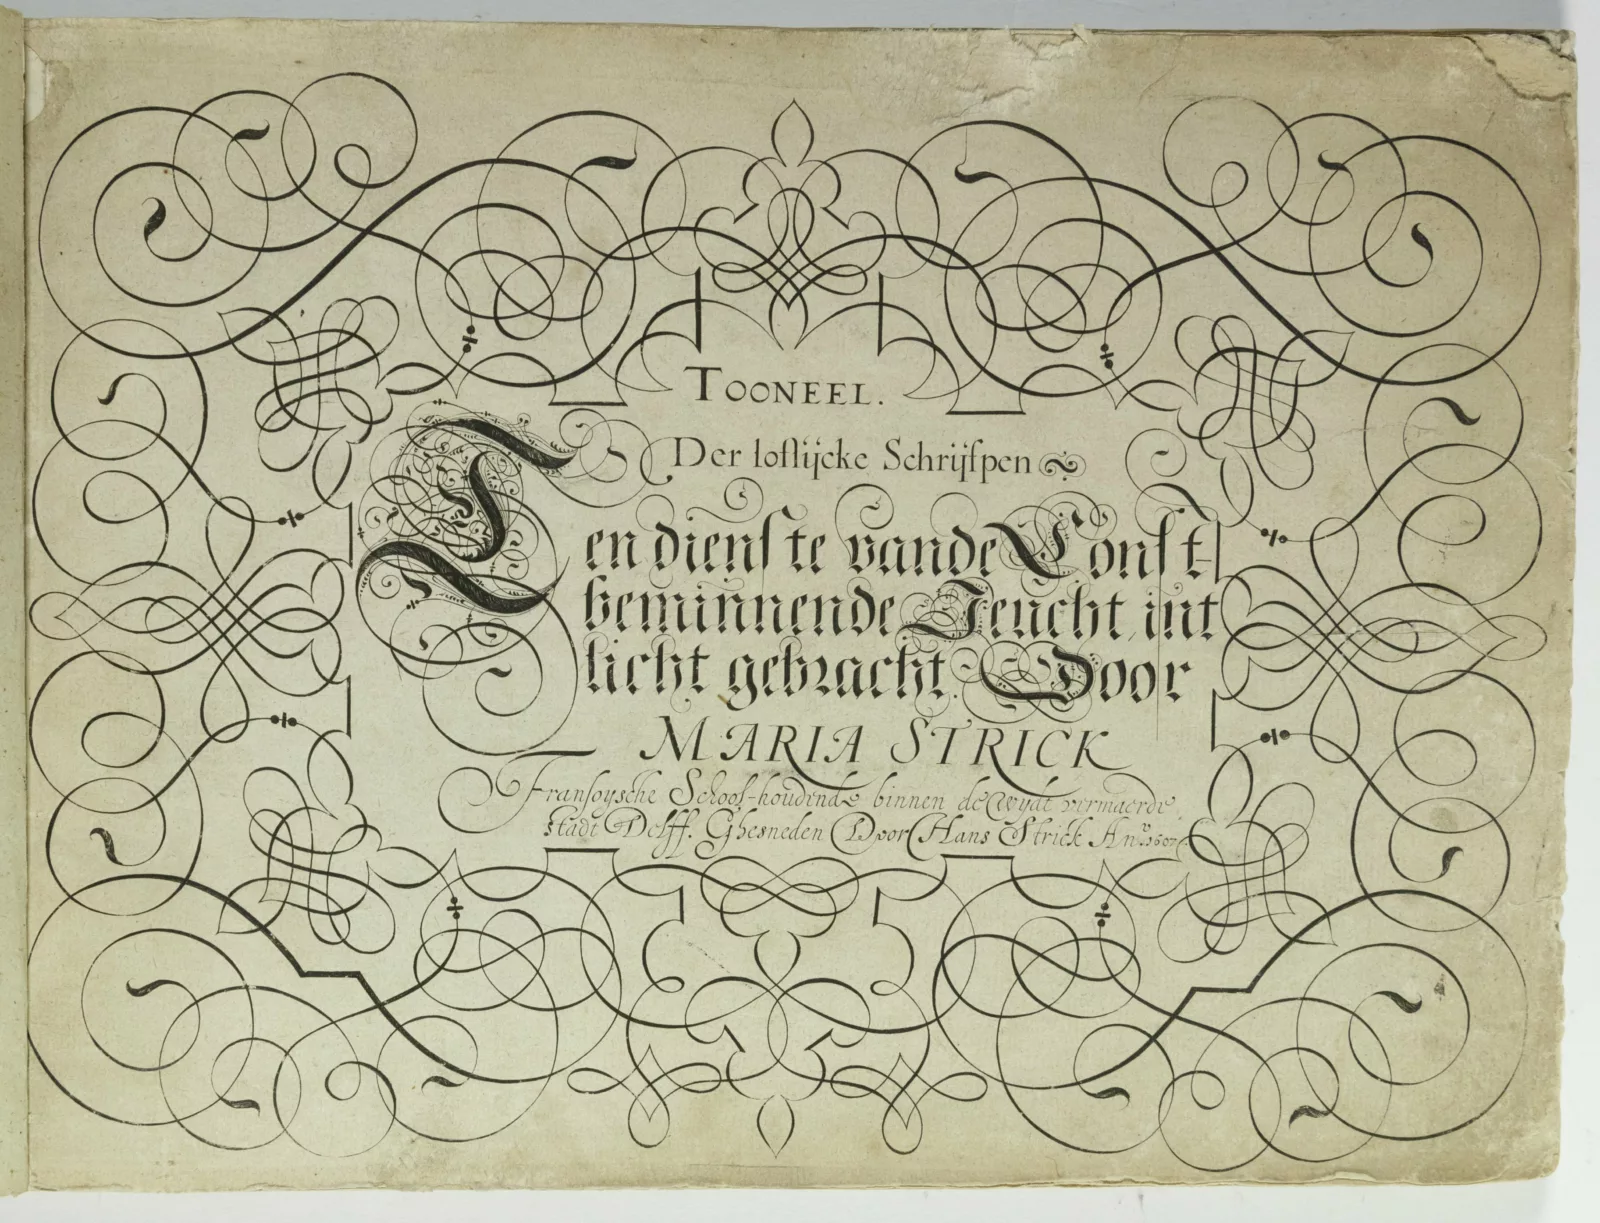 Calligraphic writing appears in the middle of the page. Under the writing are the words “Maria Strick.” Surrounding the handwriting are loops and flourishes.